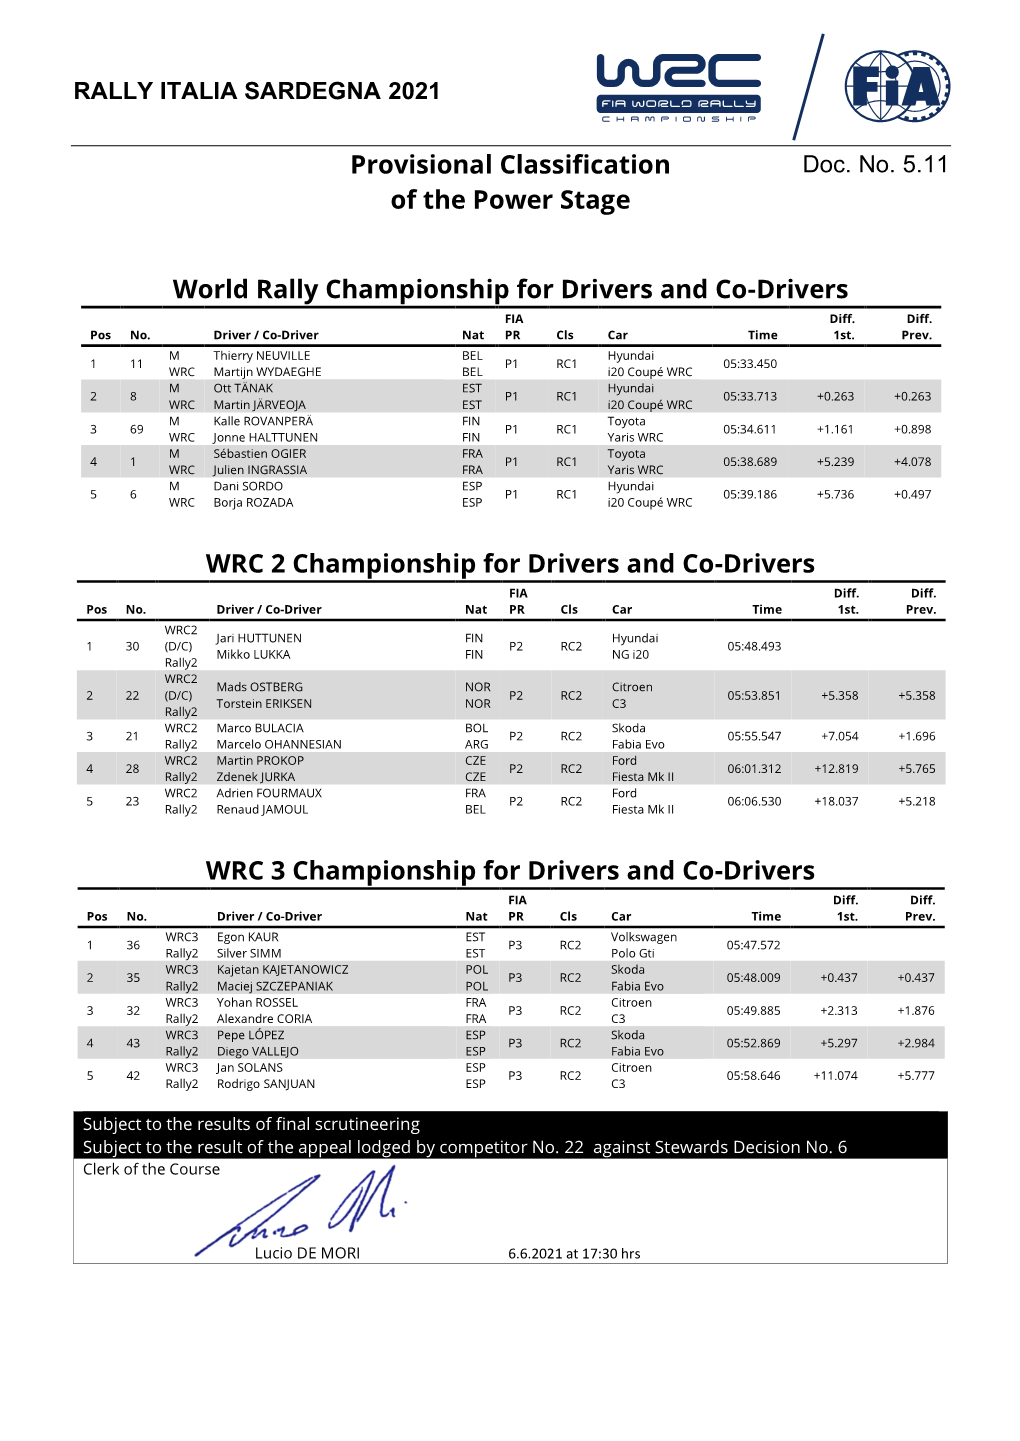 Provisional Classification of the Power Stage World Rally Championship